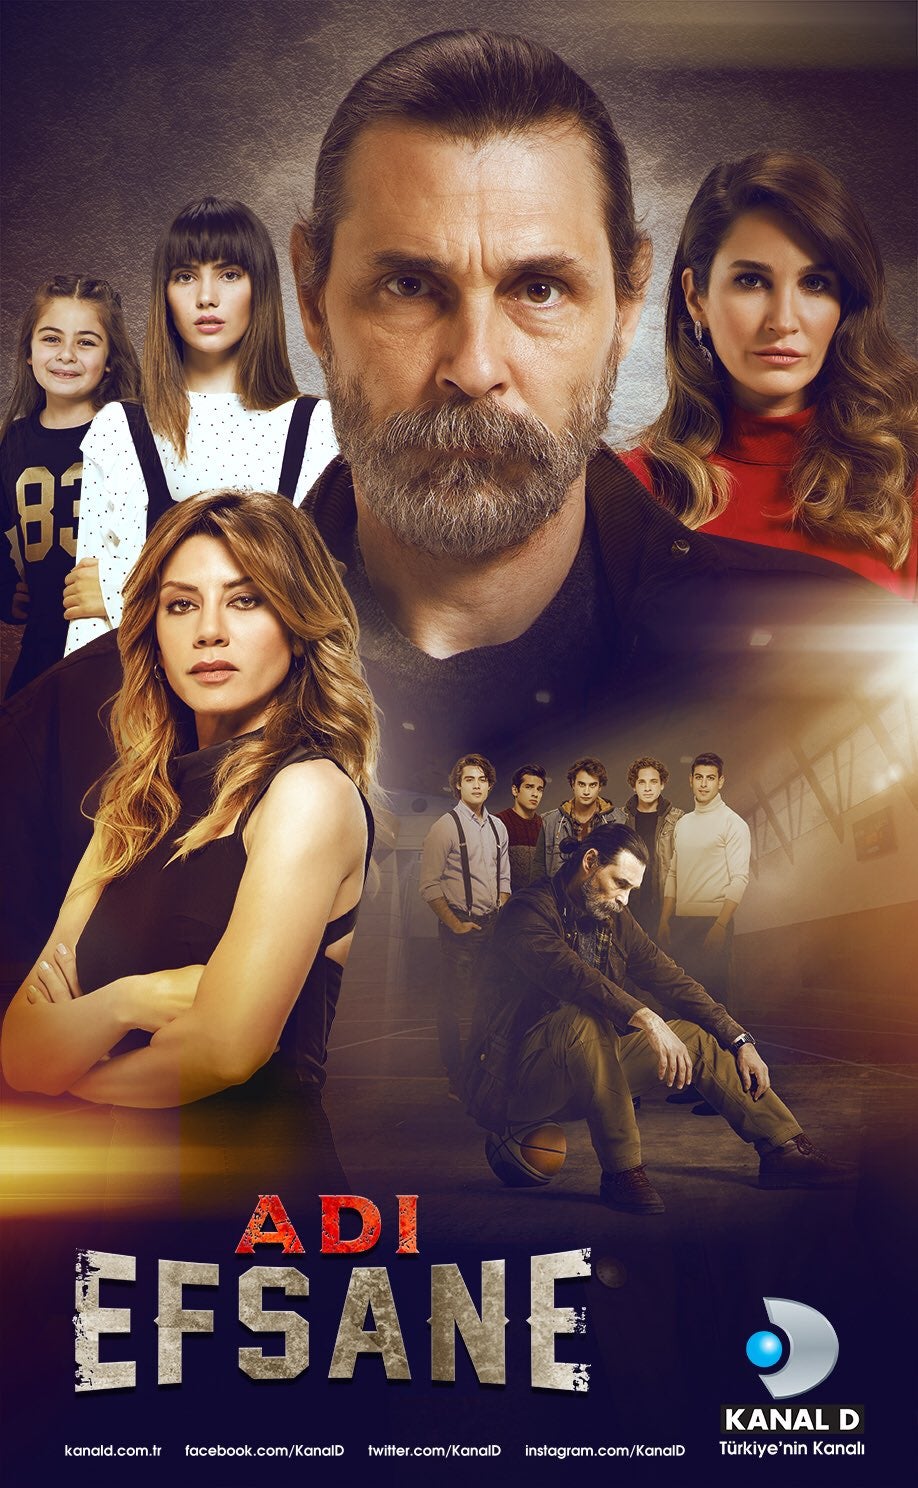 TV ratings for Adi Efsane in Turkey. D Productions TV series